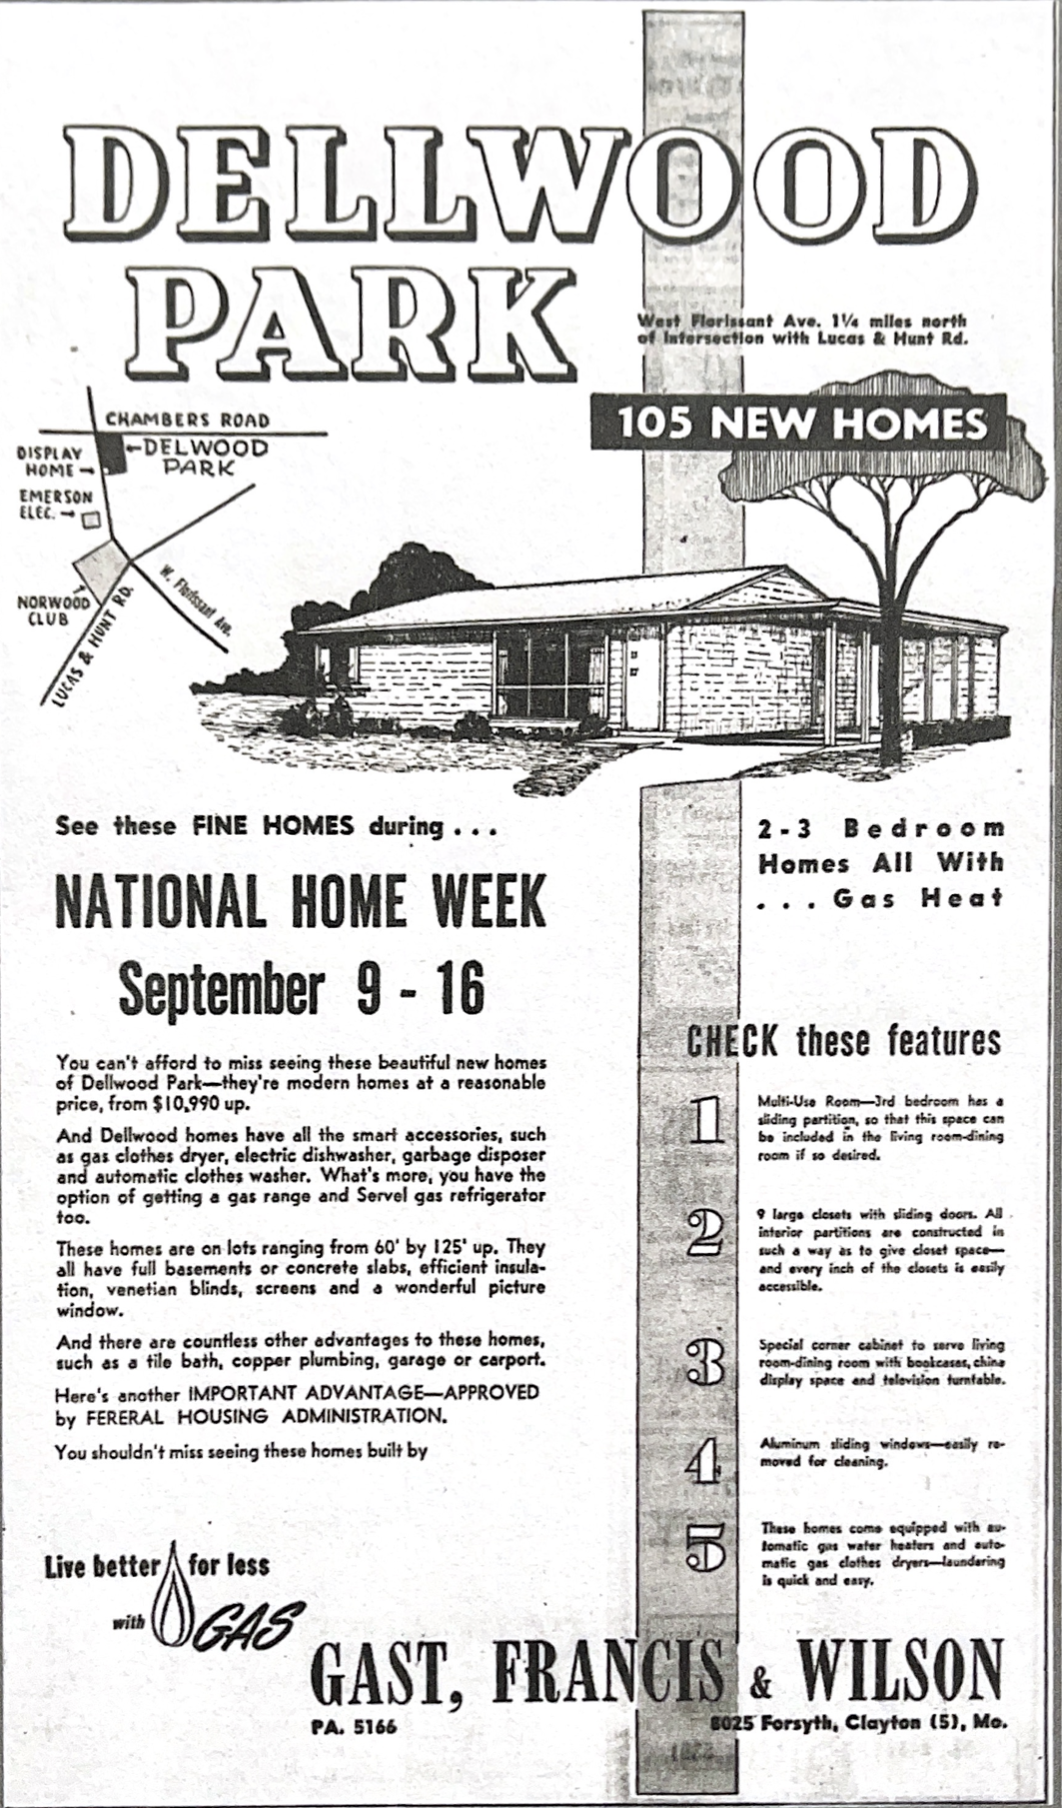 Dellwood Park promotional ad. St. Louis Post-Dispatch, September 9, 1951. The ad mentions 105 new homes, but the filed subdivision plat provides only for 100 residential lots. 